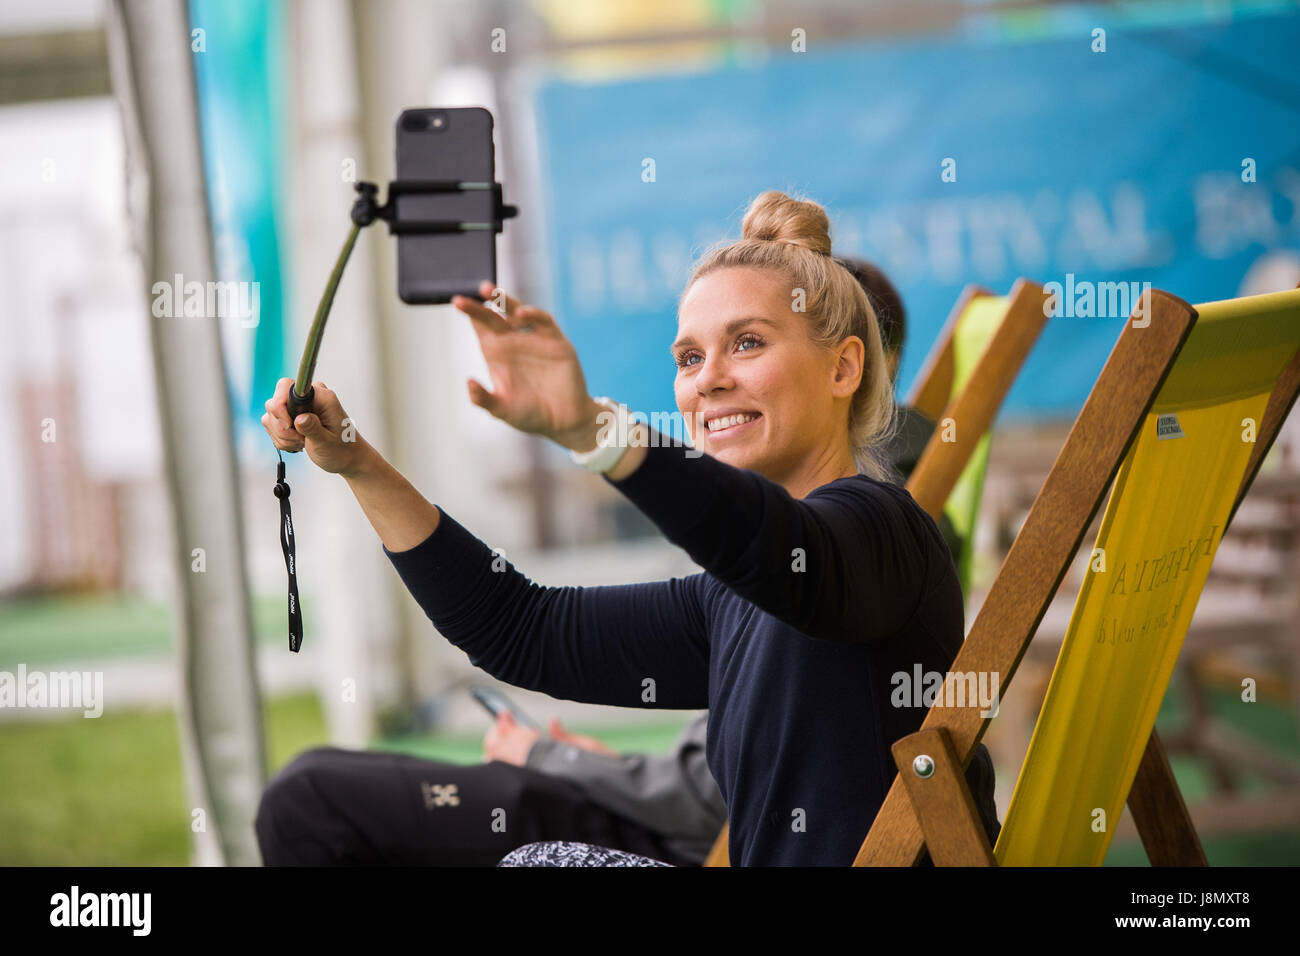 Hay Festival, Wales UK, Monday 29 May 2017 A young woman takes a selfie at the 2017 Hay Literature festival Now in its 30th year, the festival draws tens of thousand of visitors a day to what was described by former US president Bill Clinton as 'the woodstock of the mind' Photo credit Credit: keith morris/Alamy Live News Stock Photo